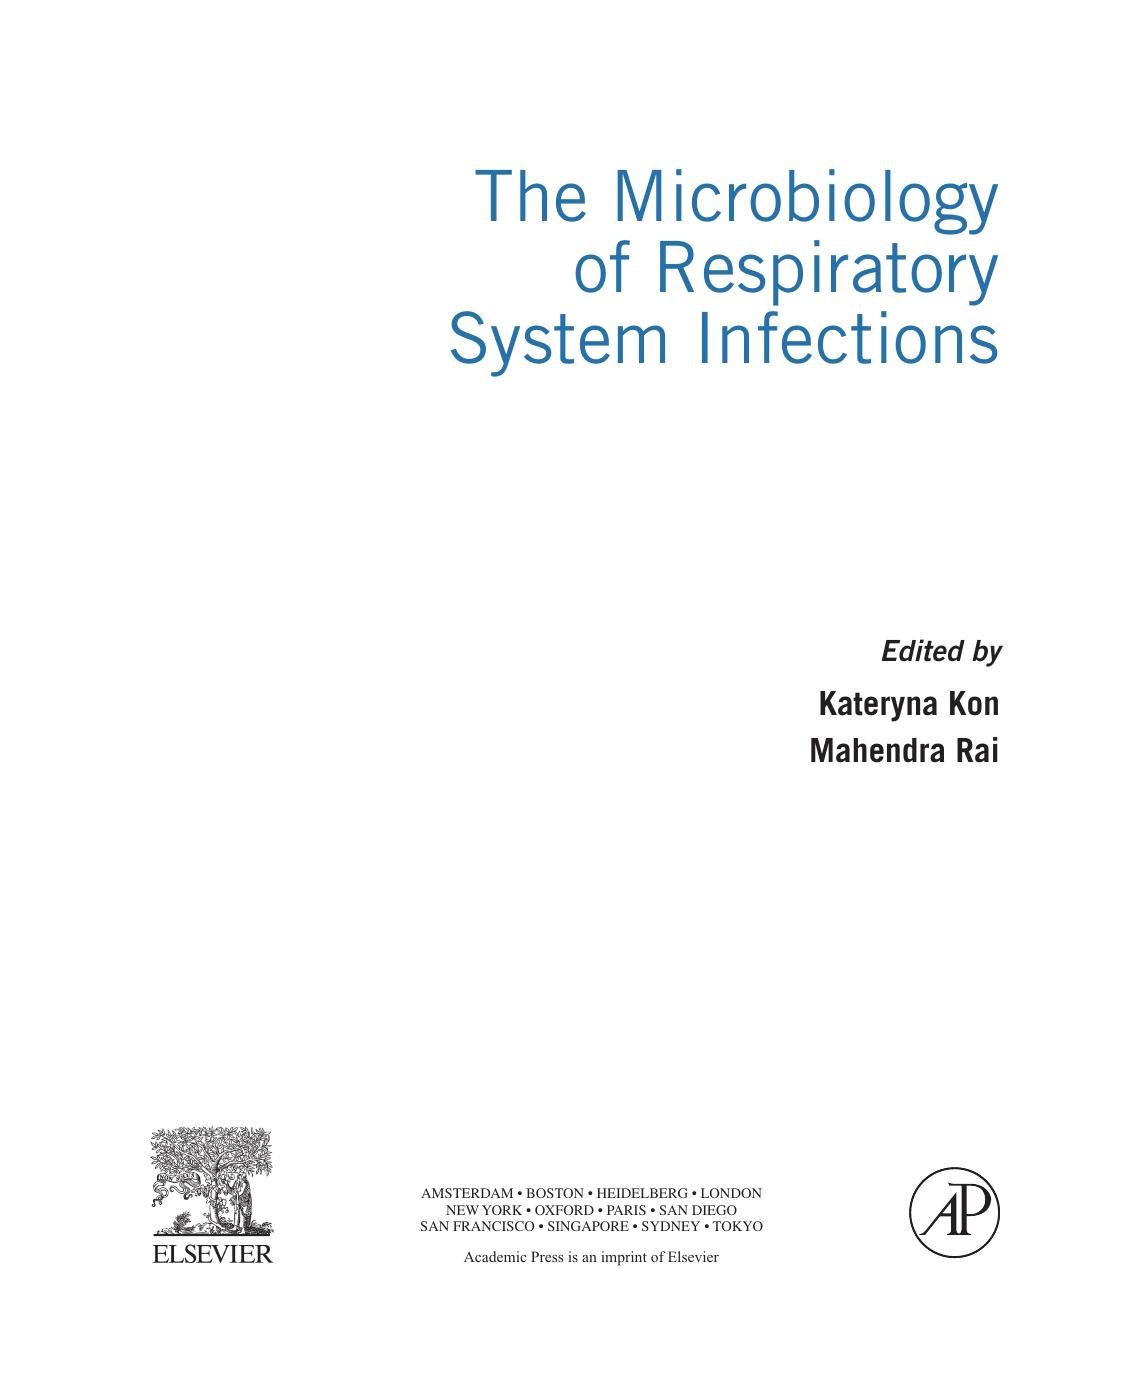 The Microbiology of Respiratory System Infections 2016